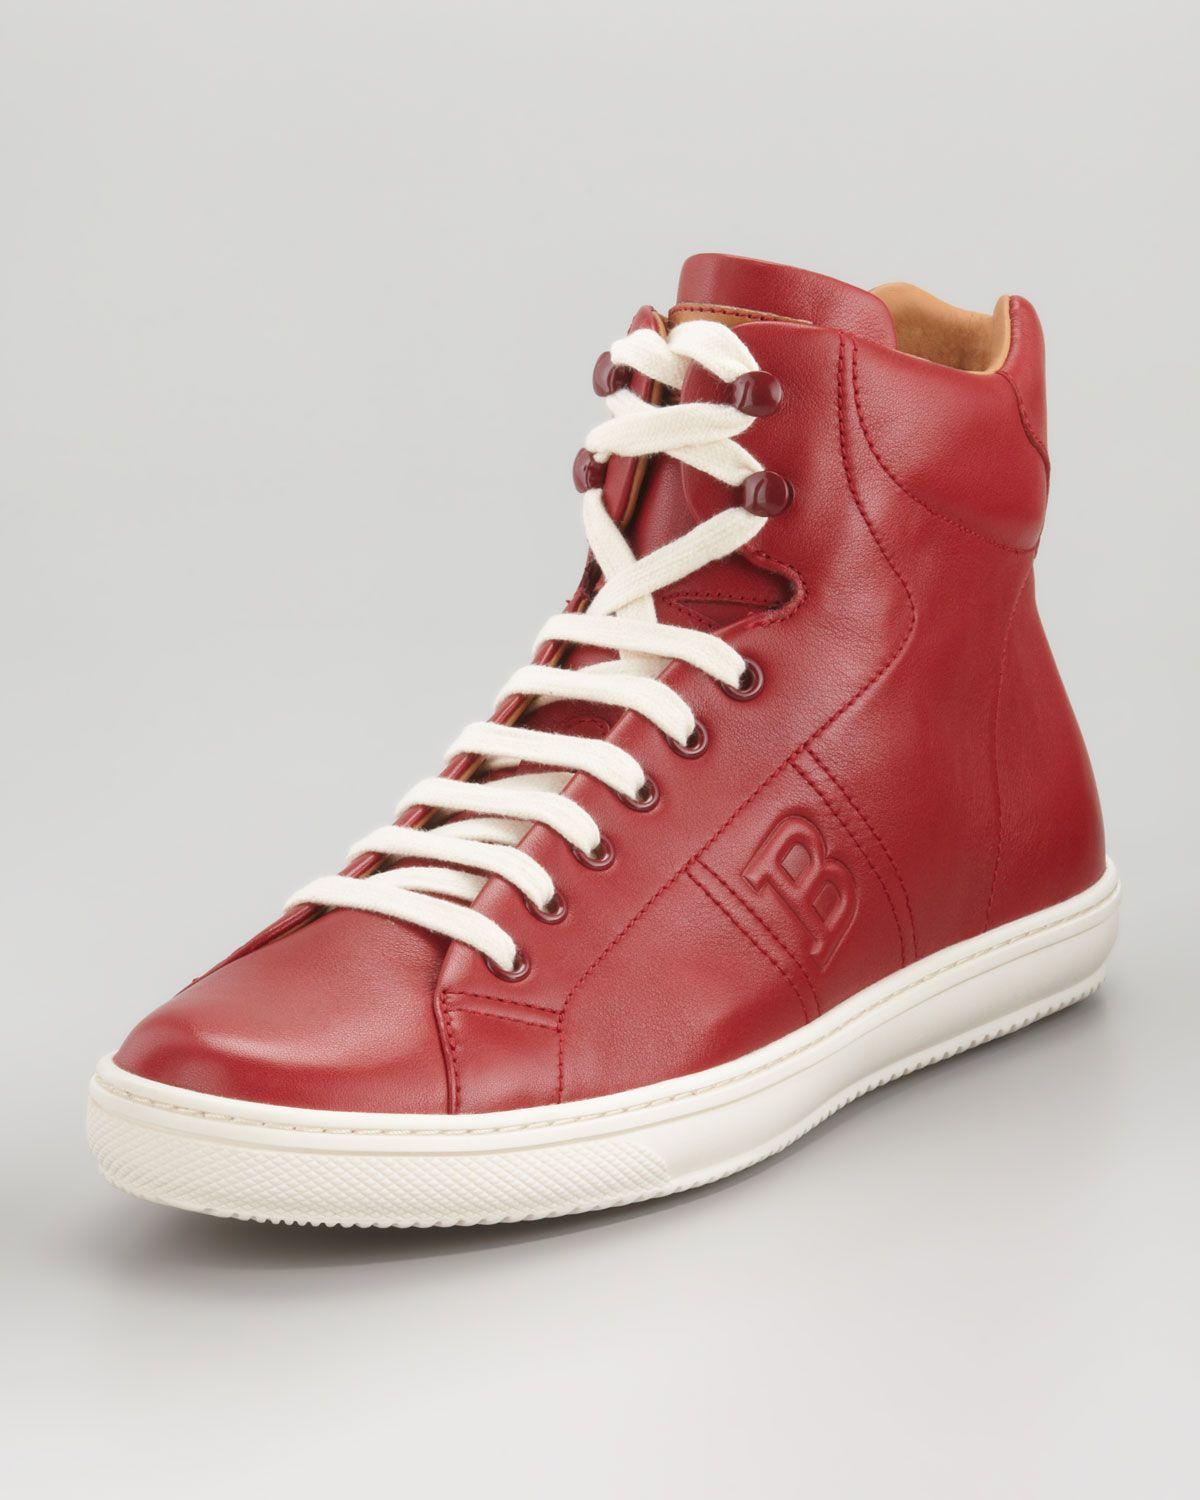 Bally Shoes Logo - Lyst Oxen Logo embossed High top Sneaker